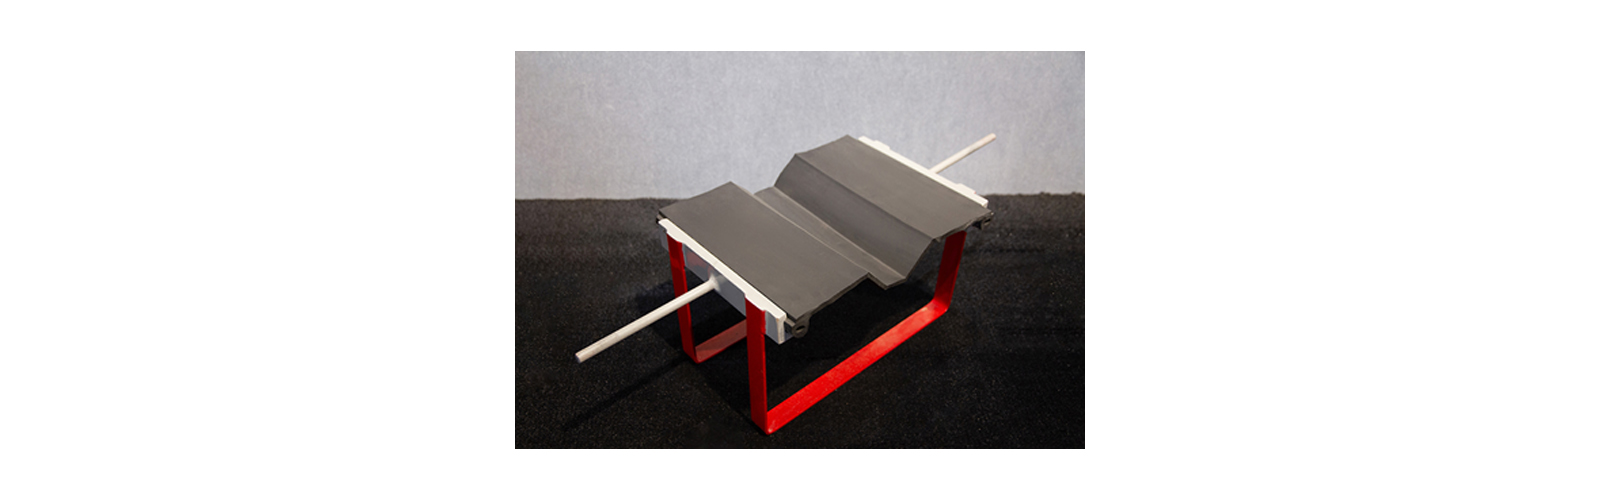 Railway Comb Plate Expension Device - TSSF-P